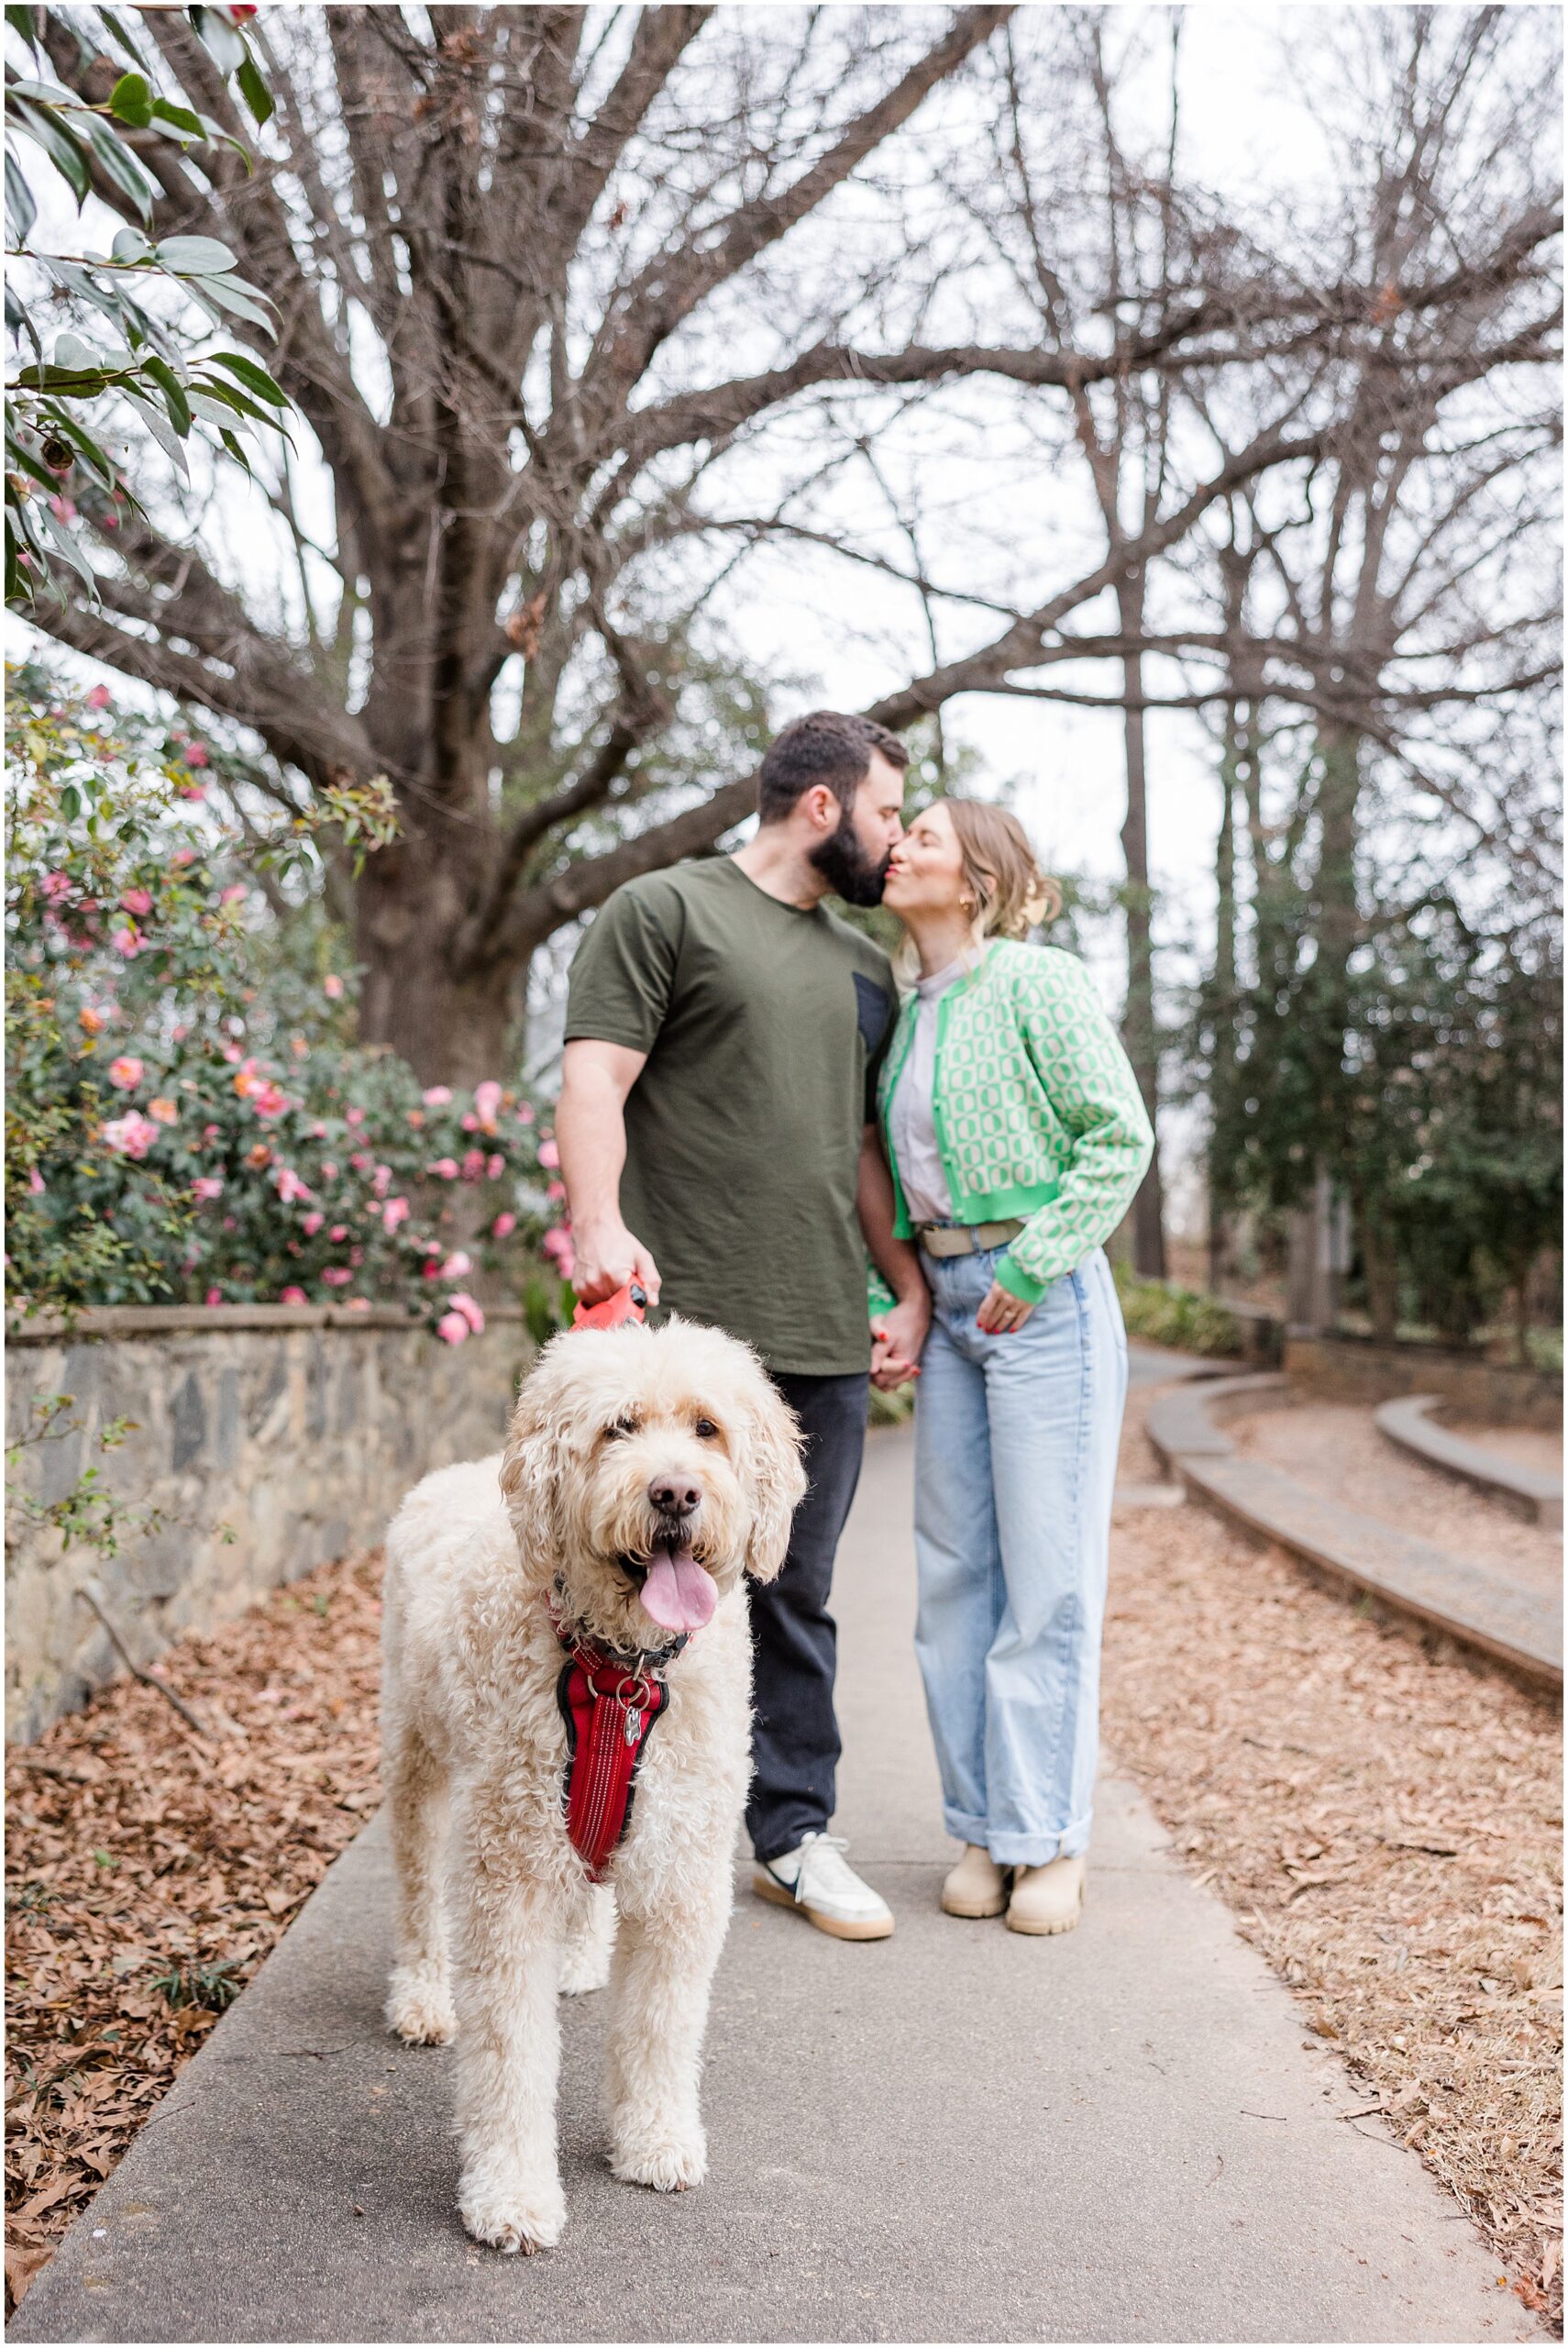 Engagement photos with a goldendoodle